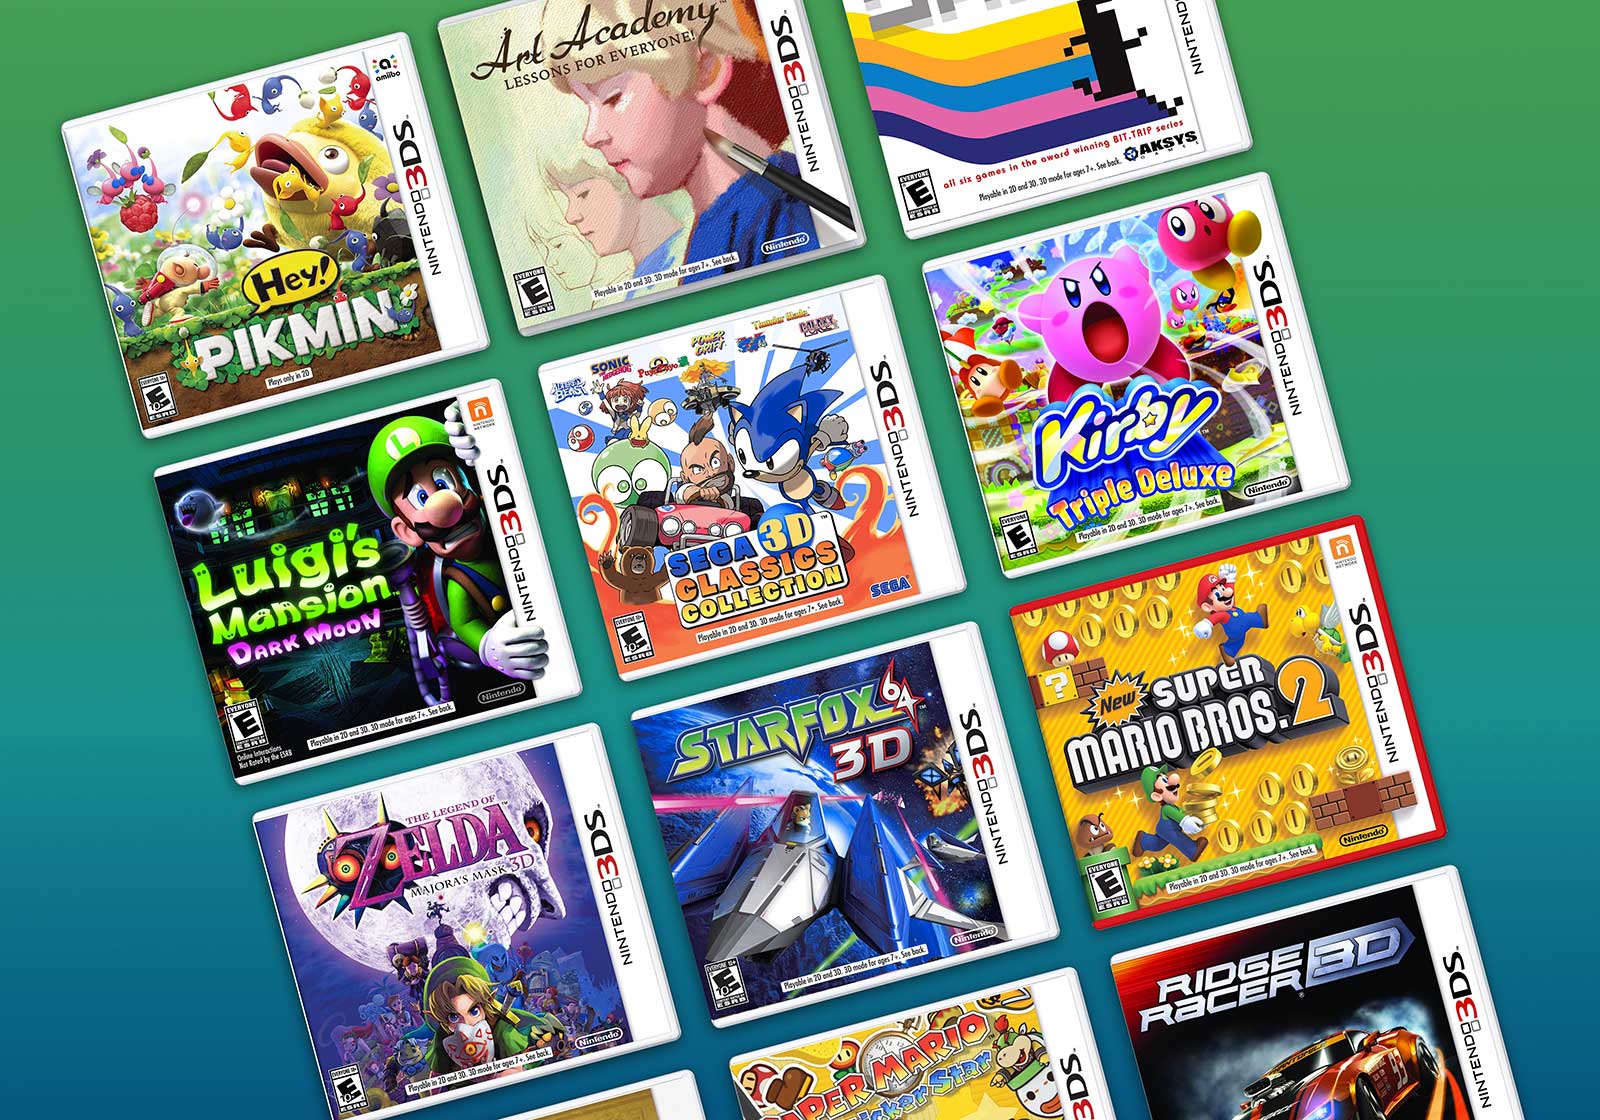 The Best Nintendo 3DS Games Under $15 - RetroGaming with Racketboy